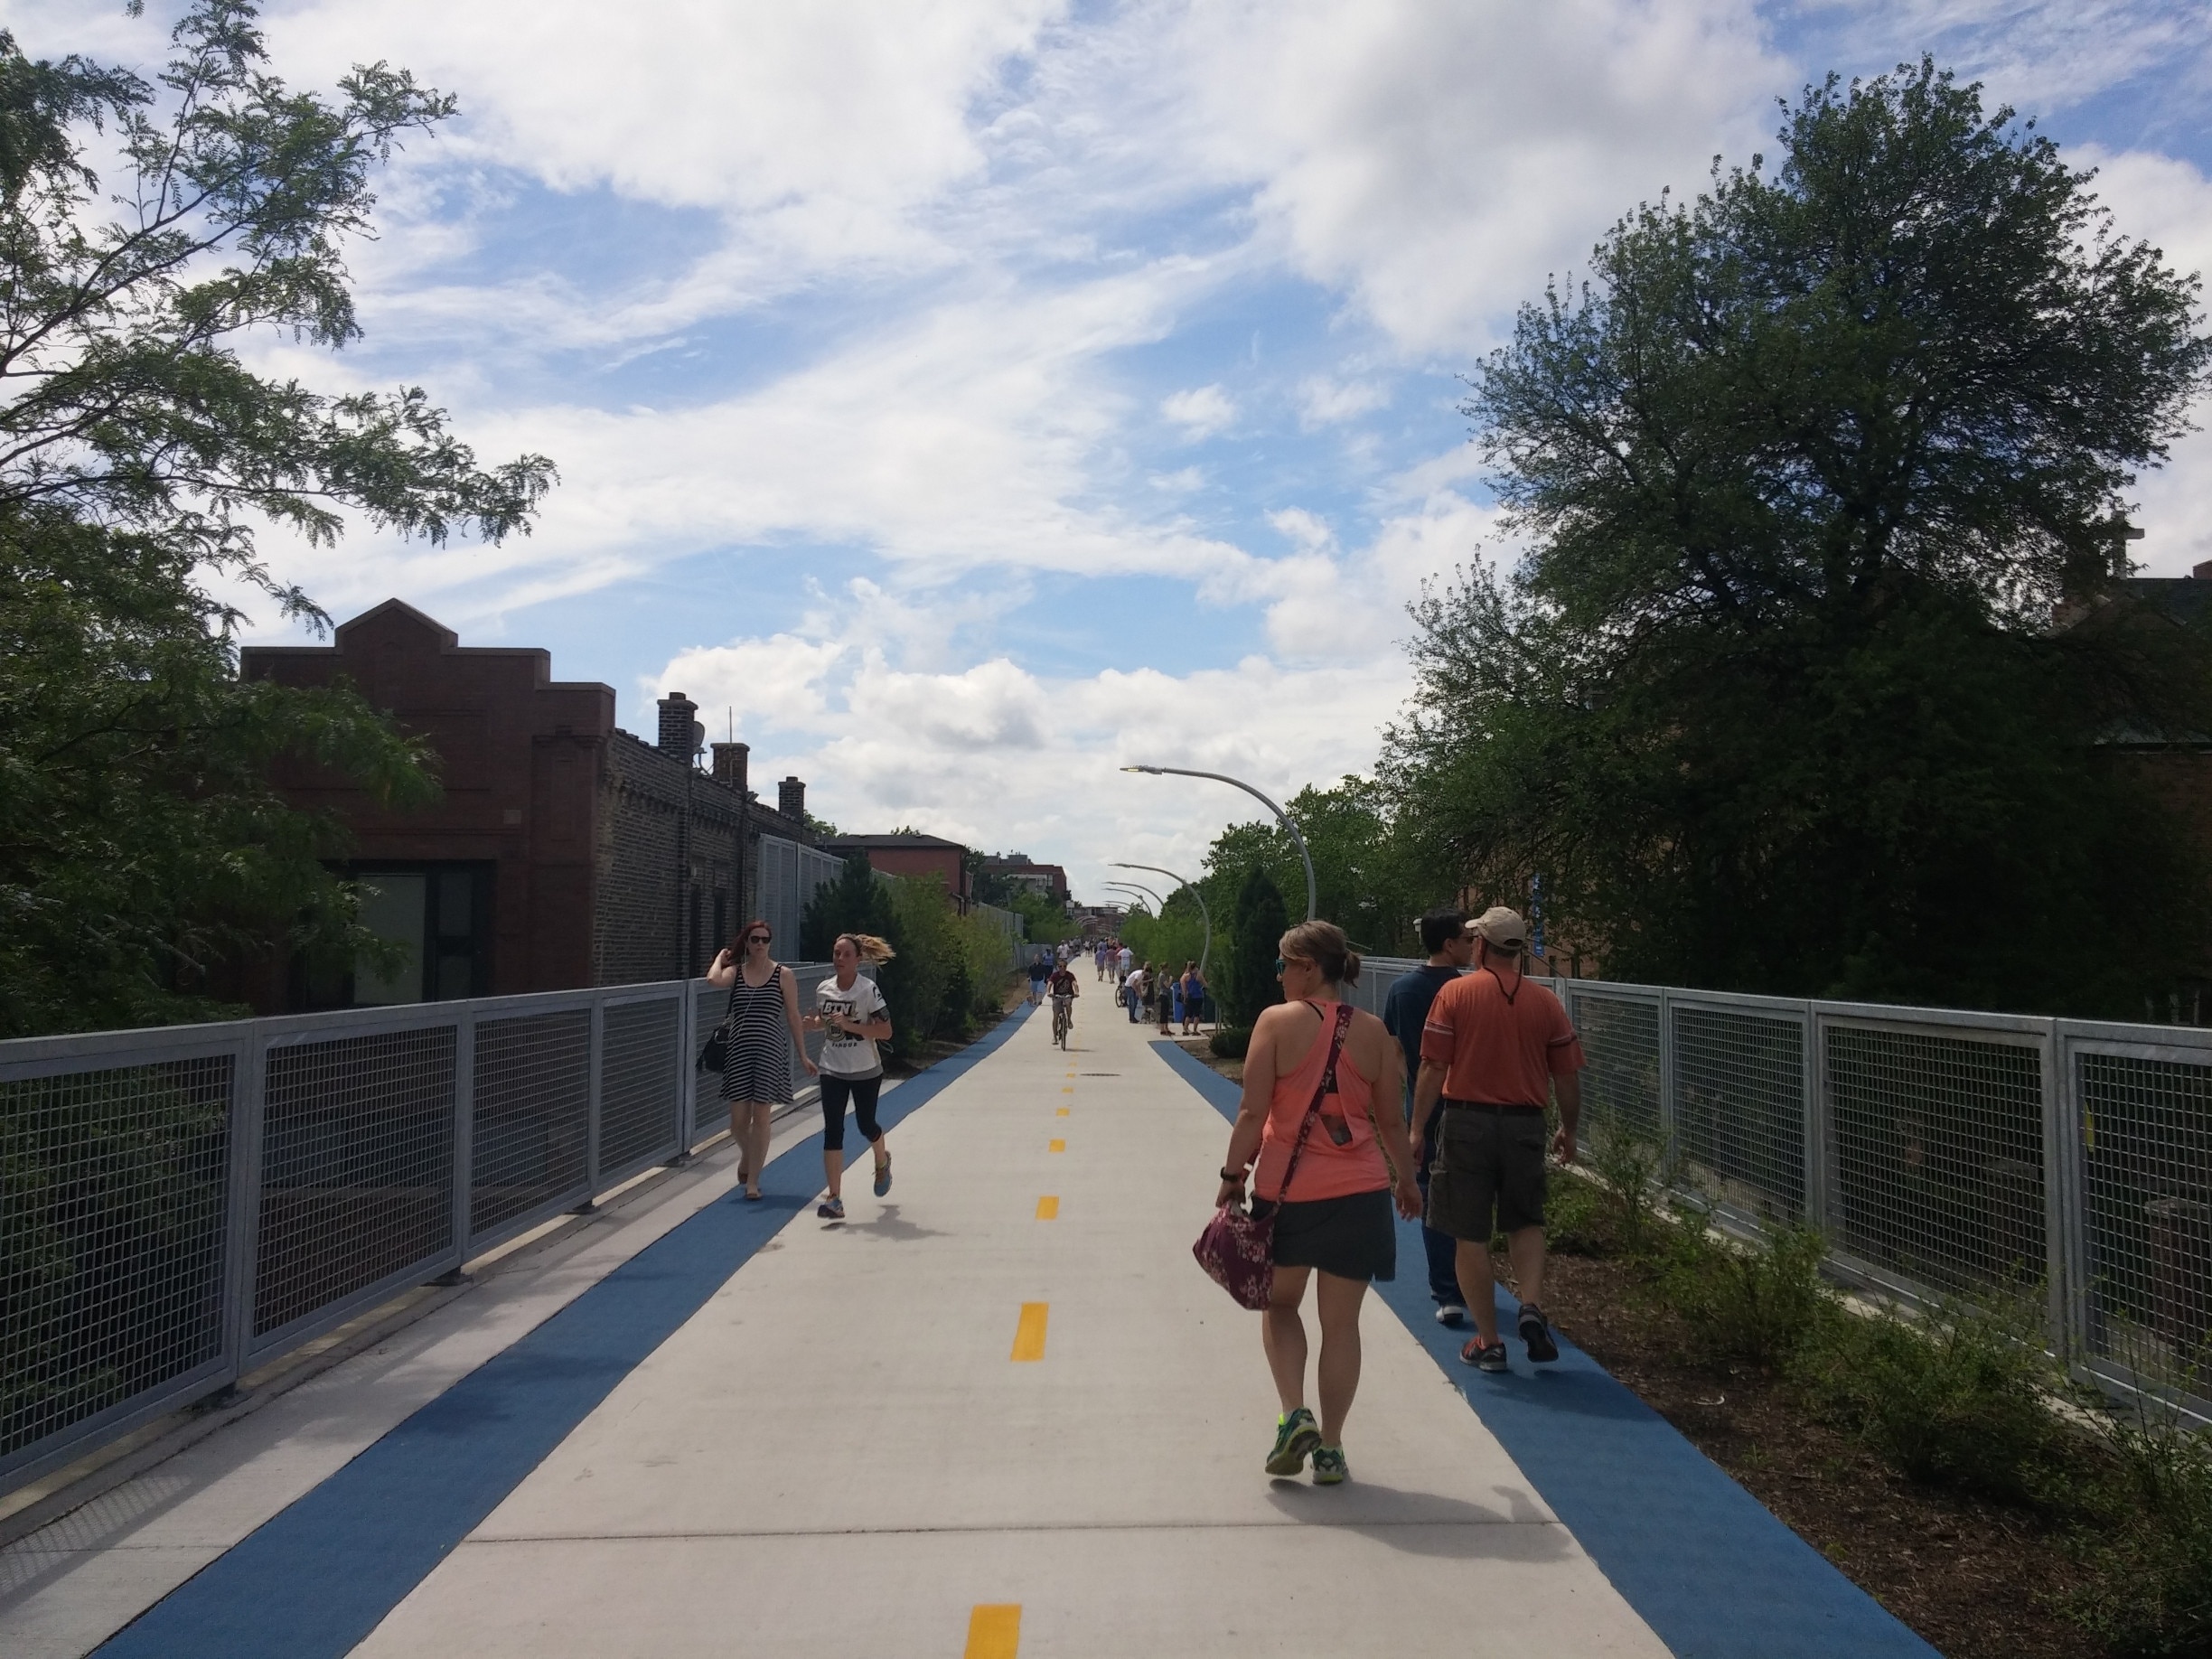 The Bloomingdale Trail also known as The 606 is a 2.7 mile elevated walking/biking trail created from an abandoned railroad line through the neighborhoods of Wicker Park, Bucktown, Humboldt Park, and Logan Square.

The Bloomingdale rail line was created after the Chicago fire and continued as a freight line until the mid 1990's.

The trail is a unique way to traverse and sight-see through these Chicago neighborhoods.

Fair warning, the serenity of pedestrian sight-seeing can be made slightly more treacherous by the occasional overly aggressive Schwinn Armstrong.